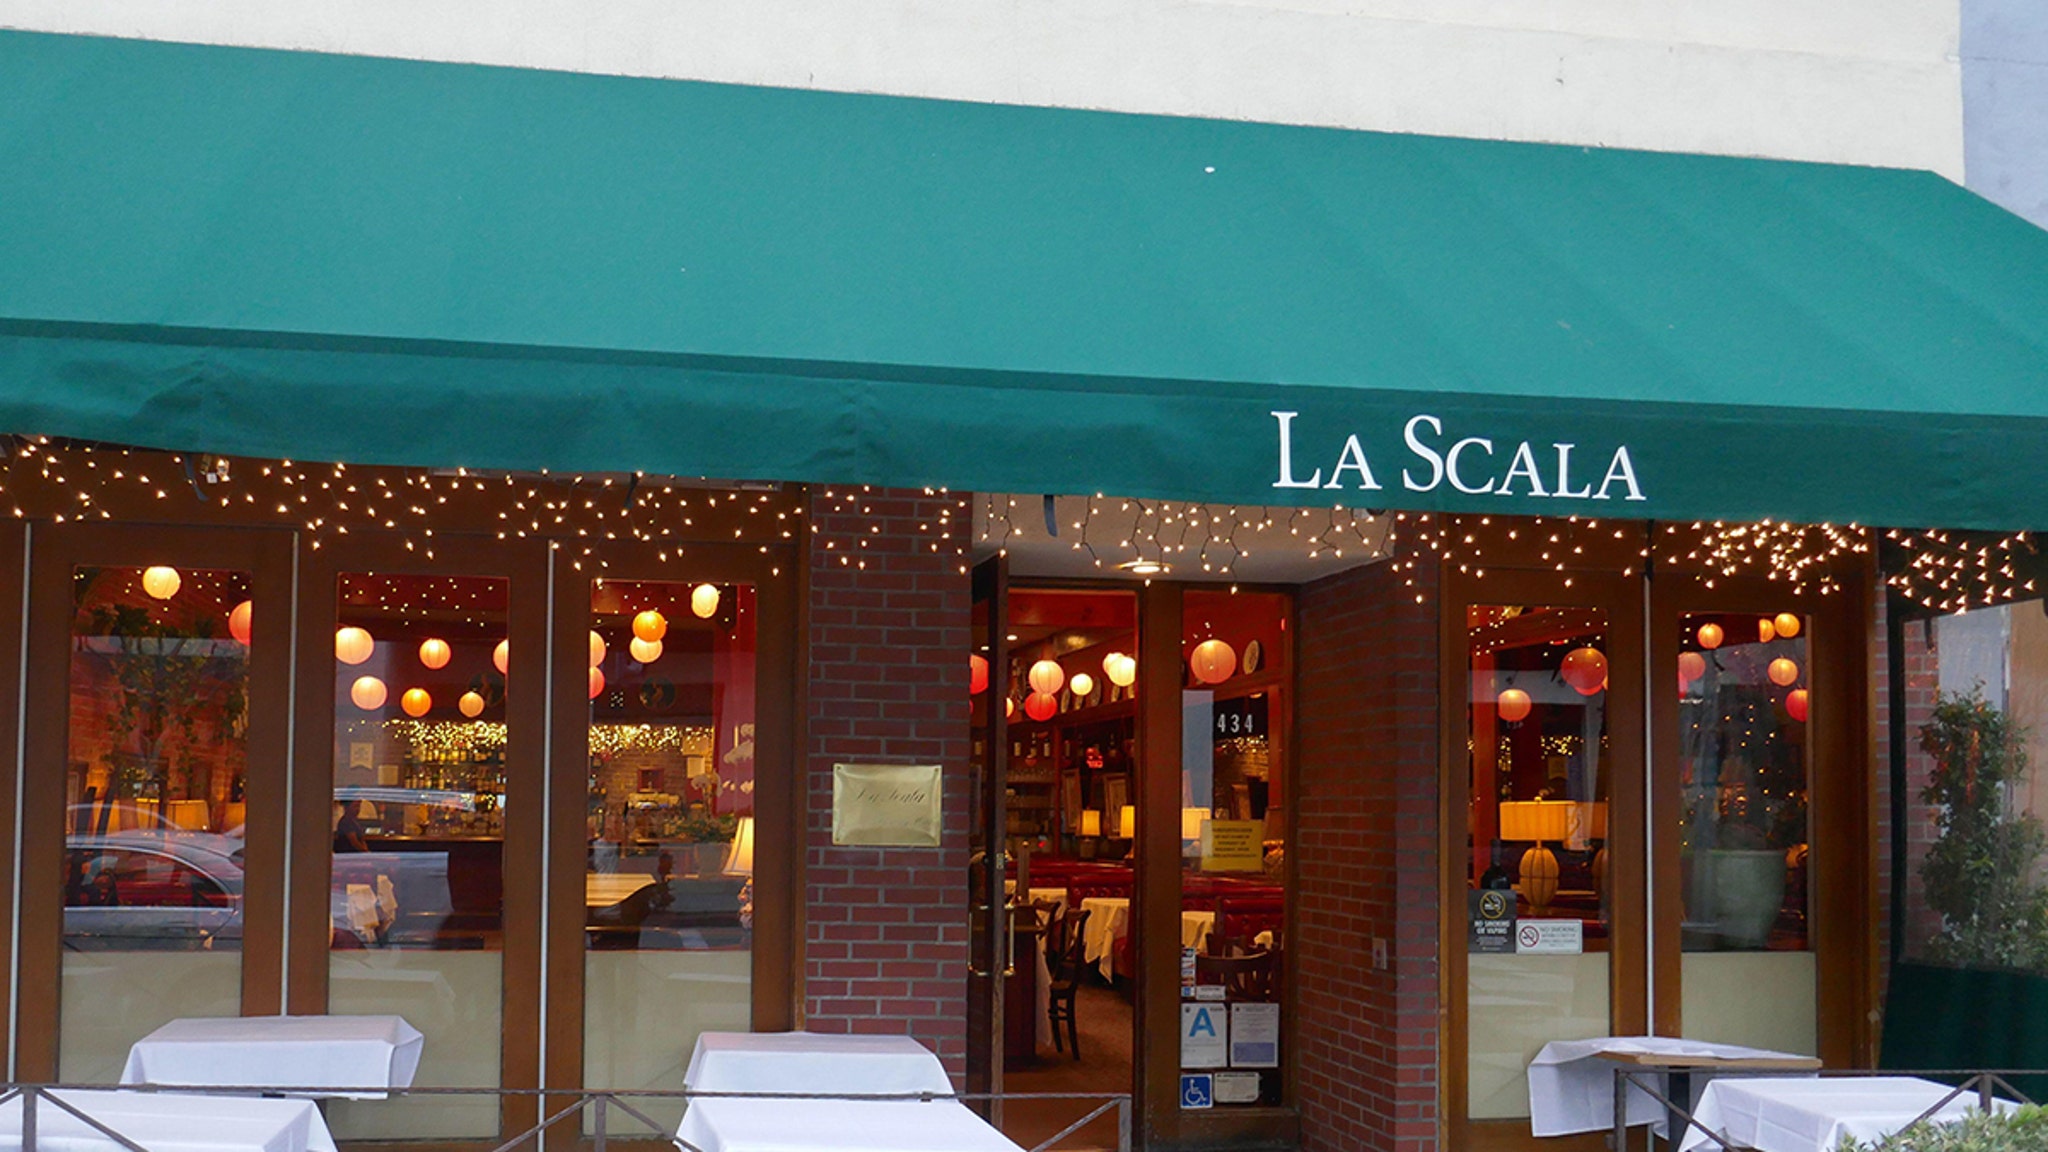 Beverly Hills’ La Scala restaurant invites people to the NYE party in secret